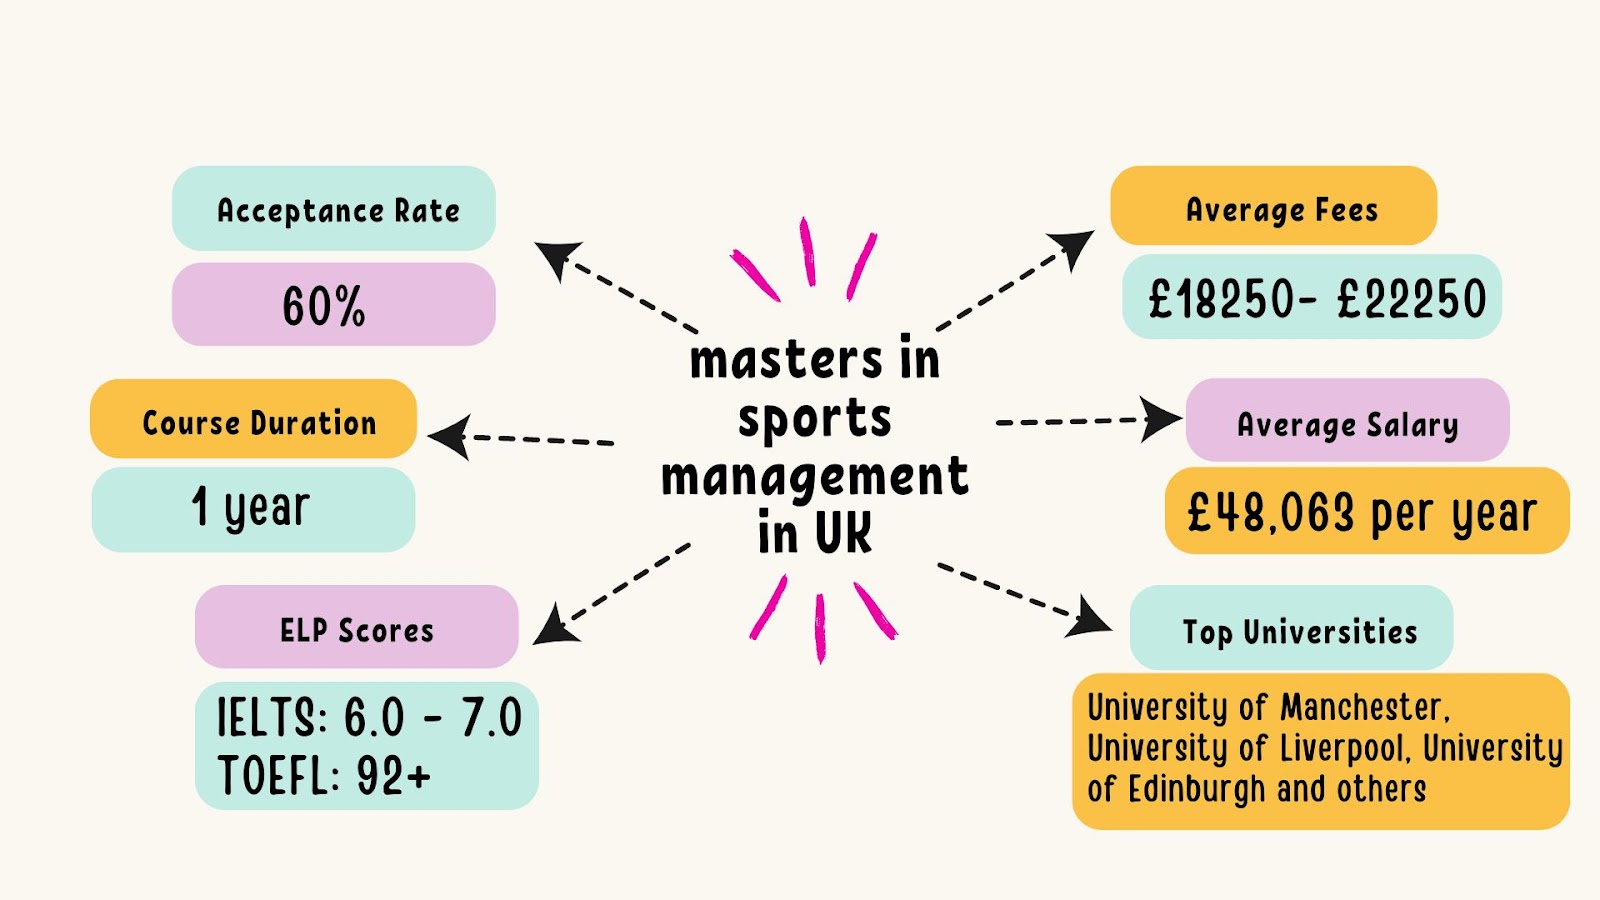 Highlights of masters in sports management in the UK